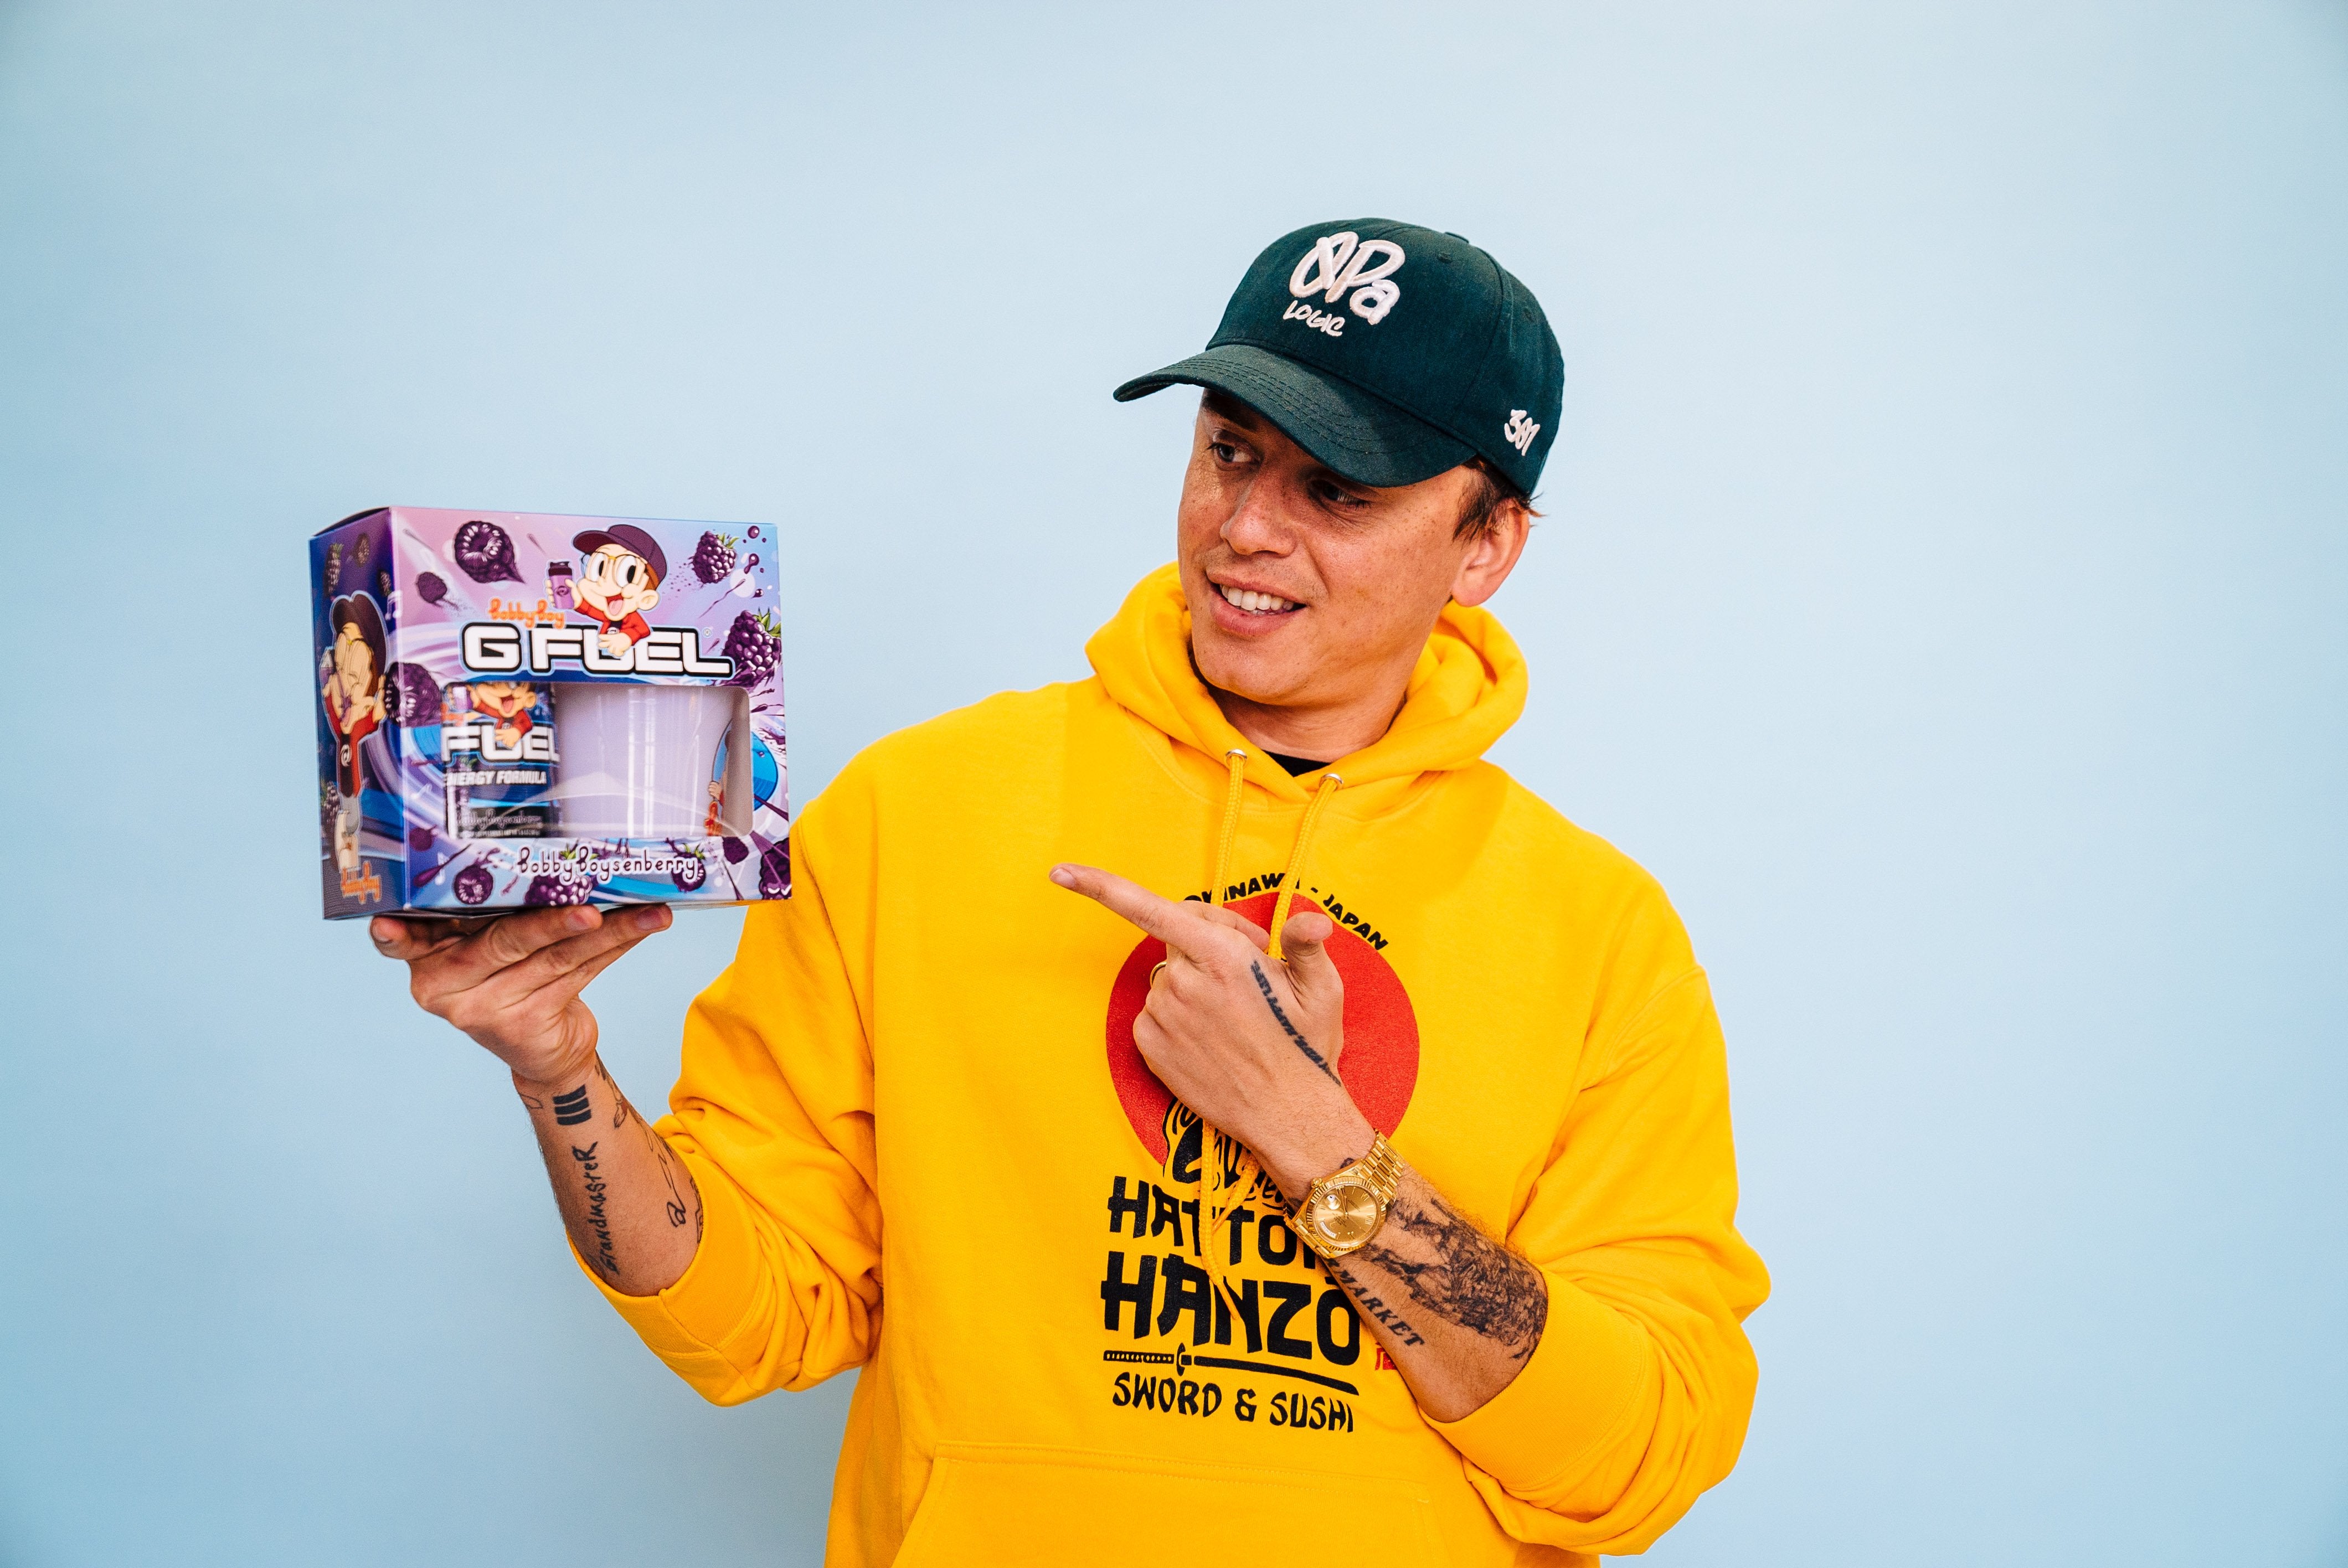 G Fuel And Logic Are Releasing “bobby Boysenbenberry On Feb 17th